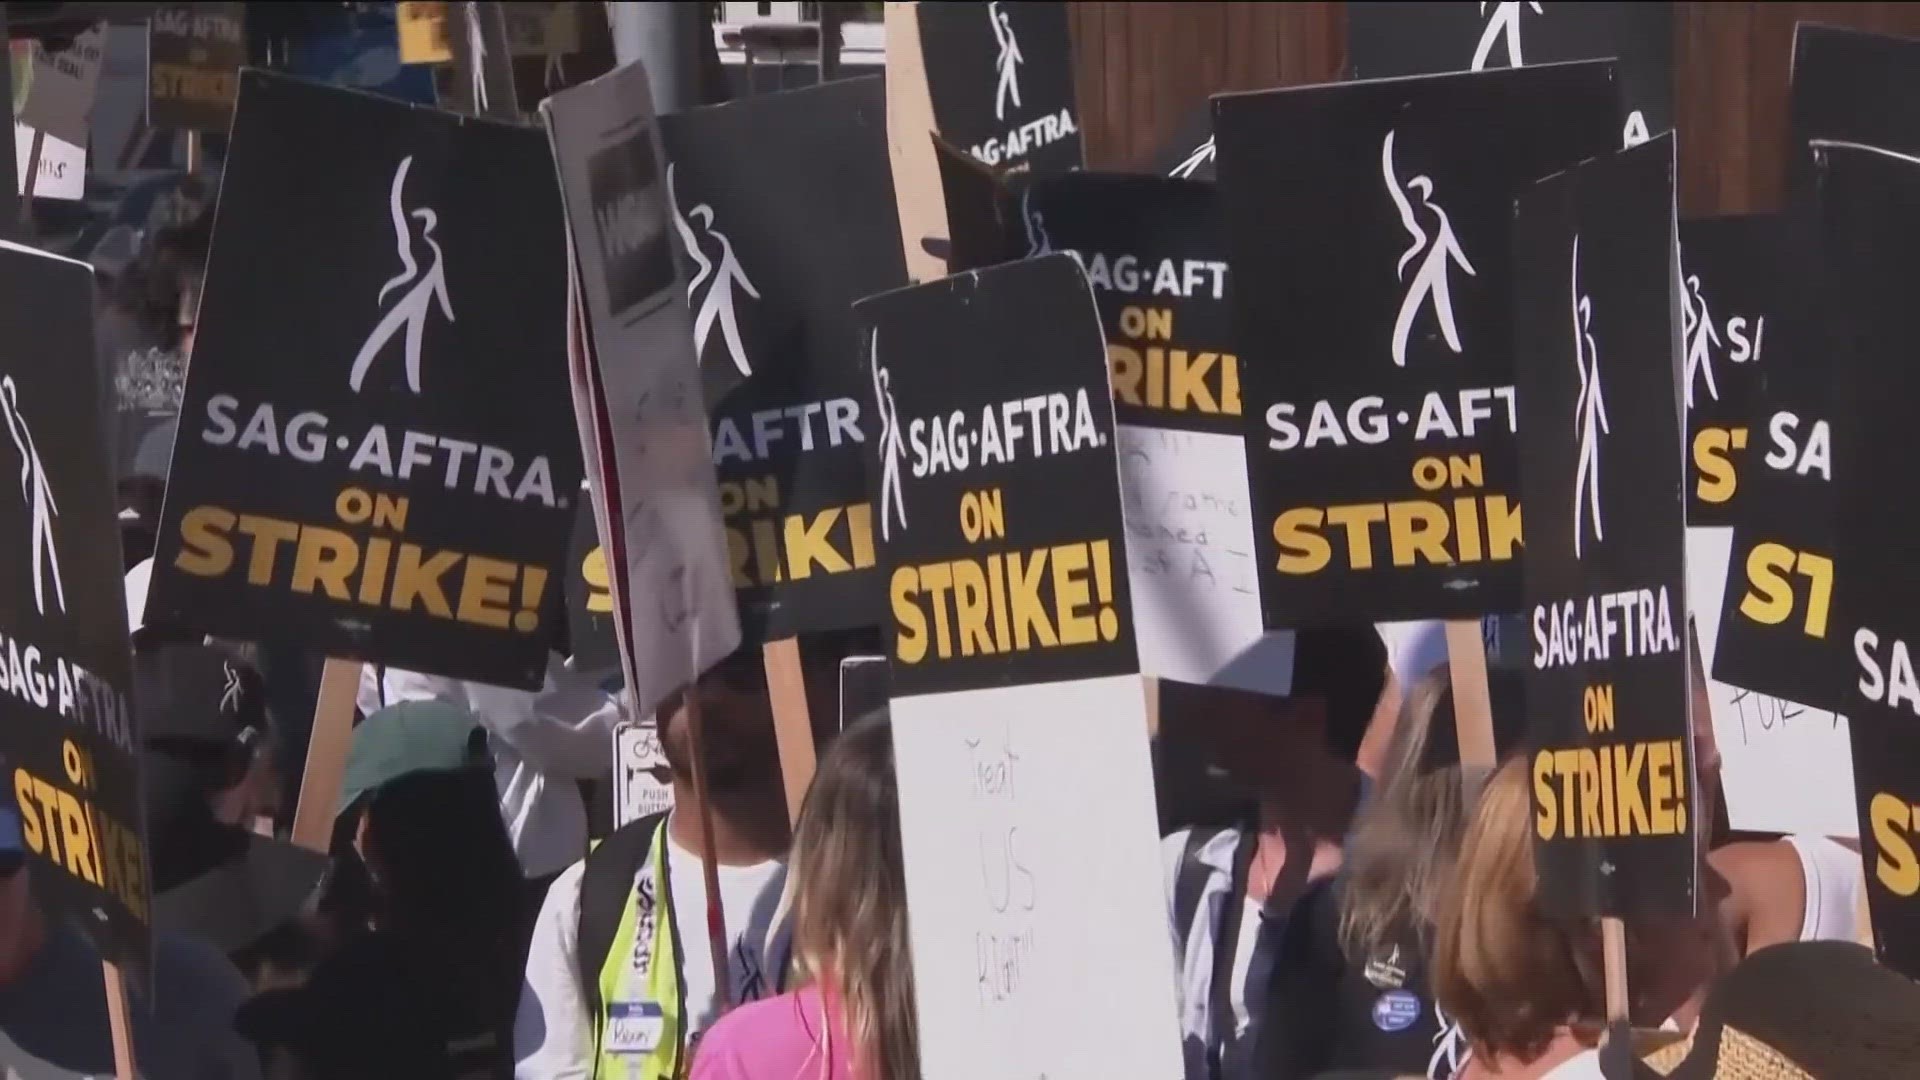 For weeks, actors, writers and top entertainment talent with the SAG-AFTRA union have been on strike, picketing outside major Hollywood studios. Now that strike